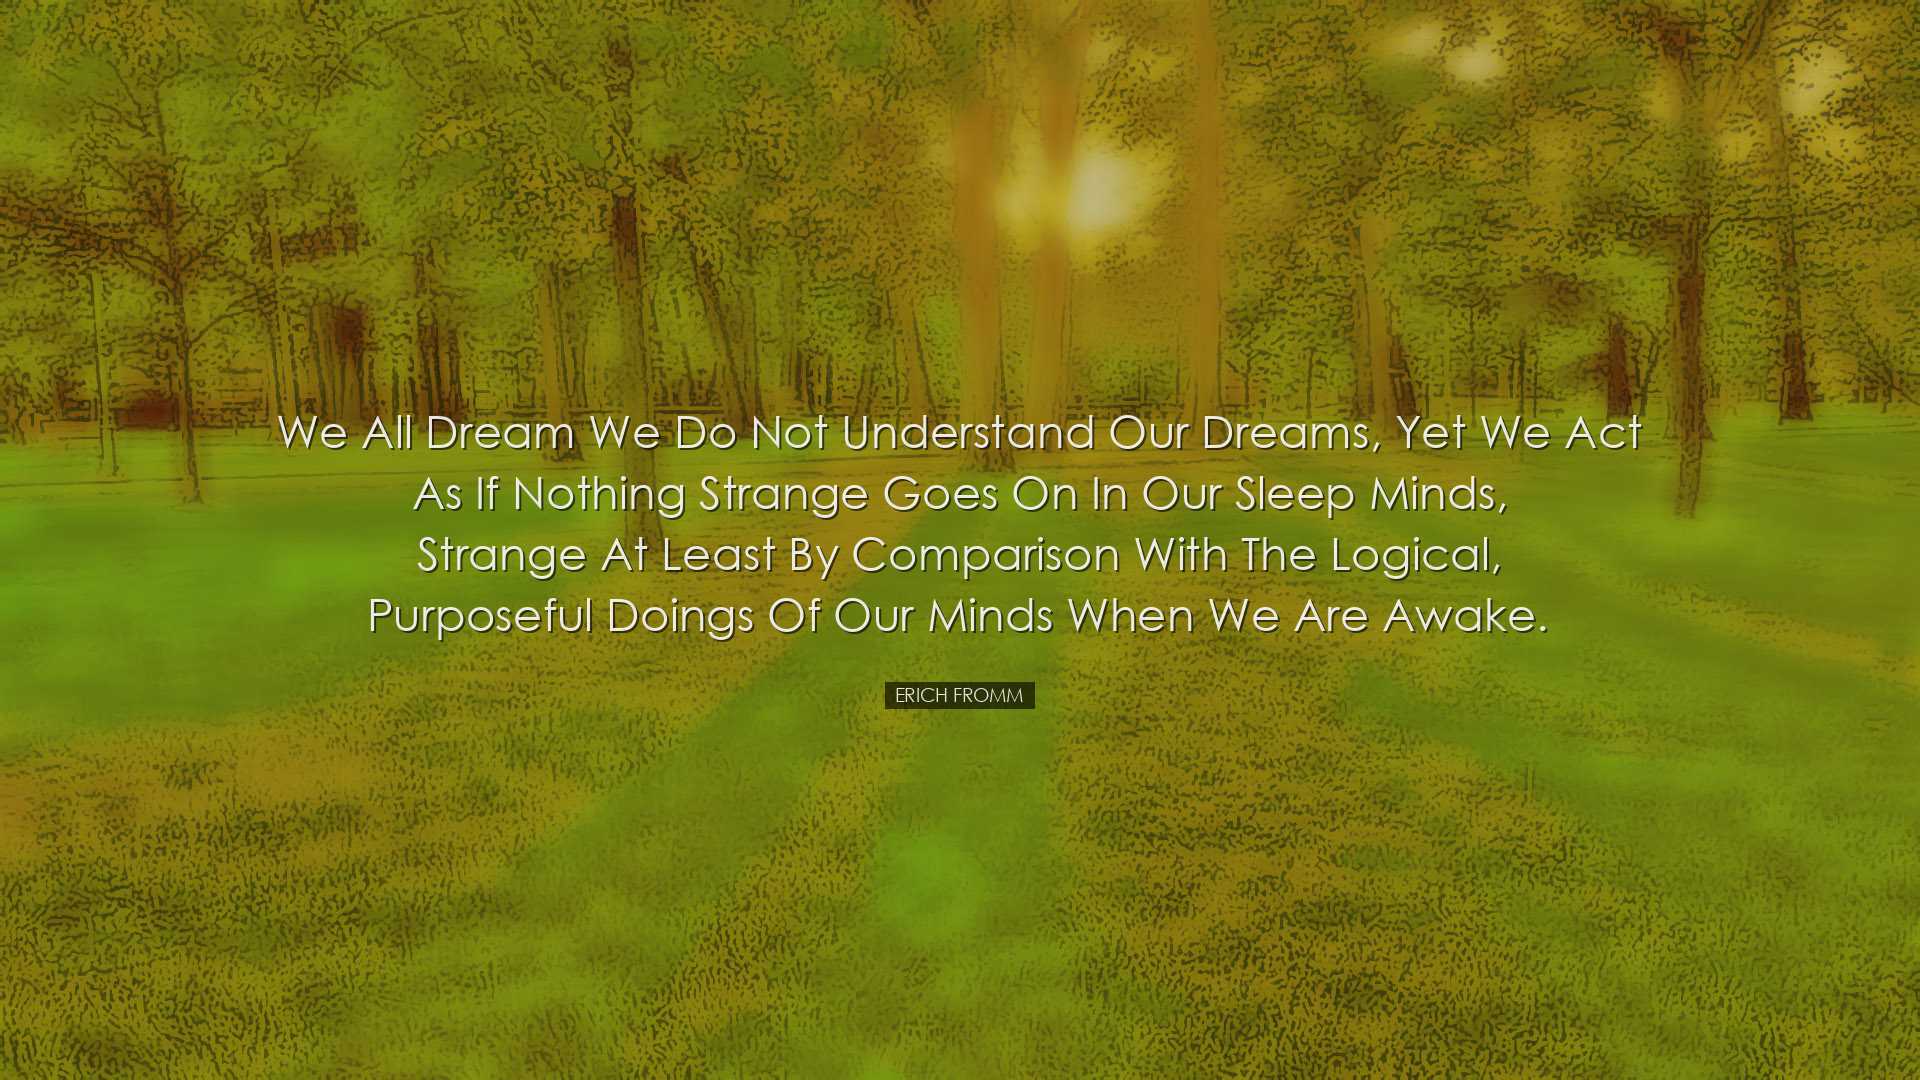 We all dream we do not understand our dreams, yet we act as if not